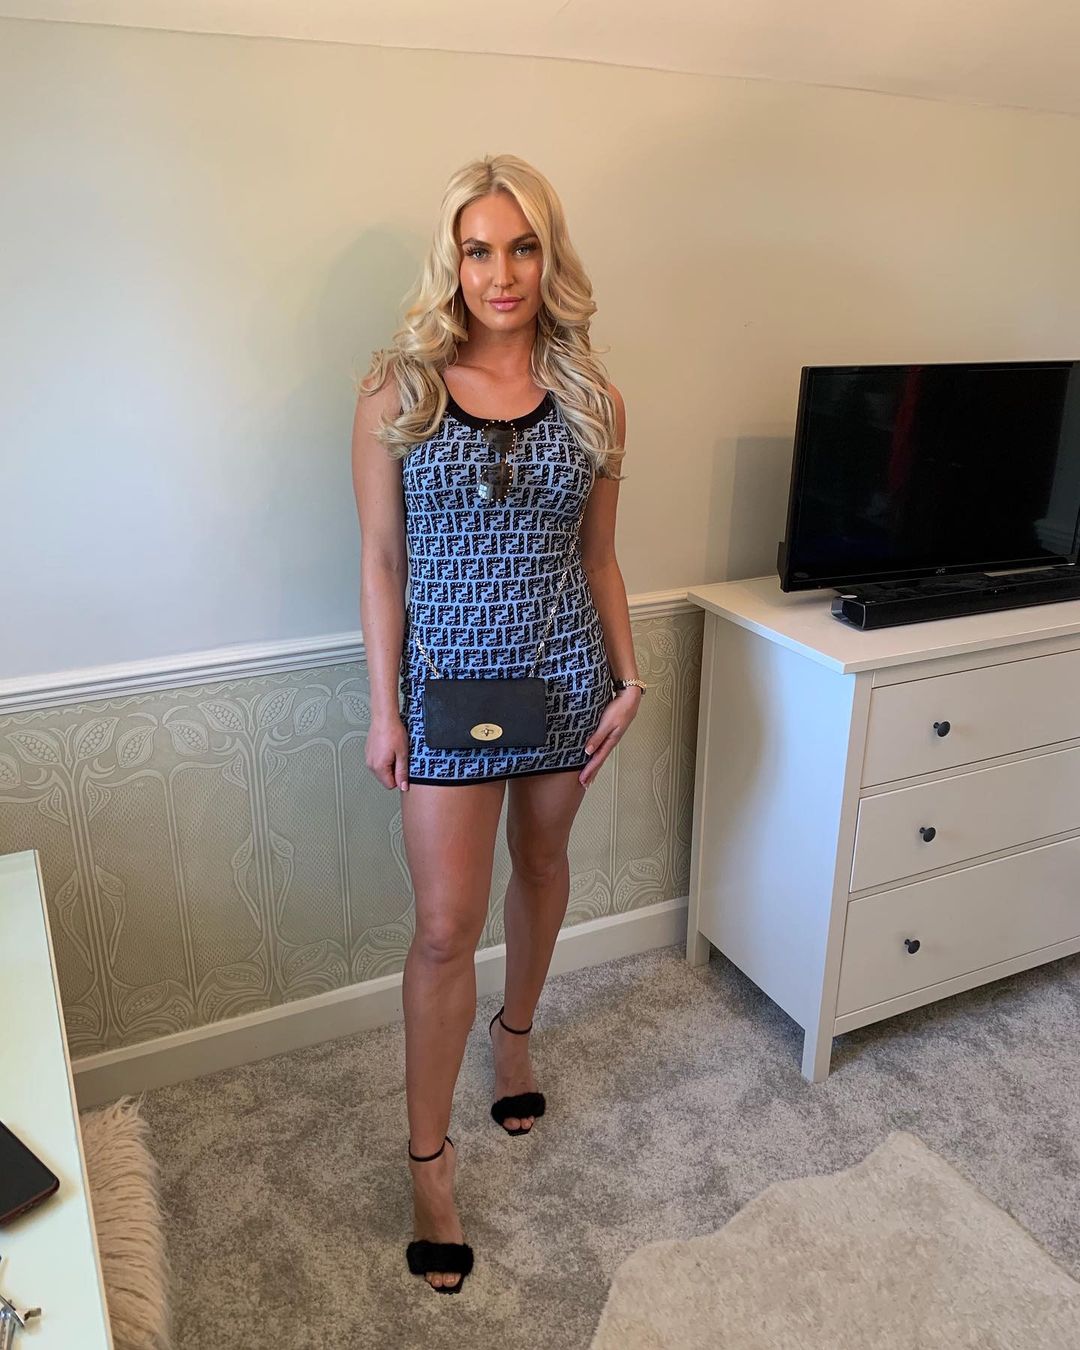 PHOTOS Charley Hull hit up the beach aprs une longue journe de golf!